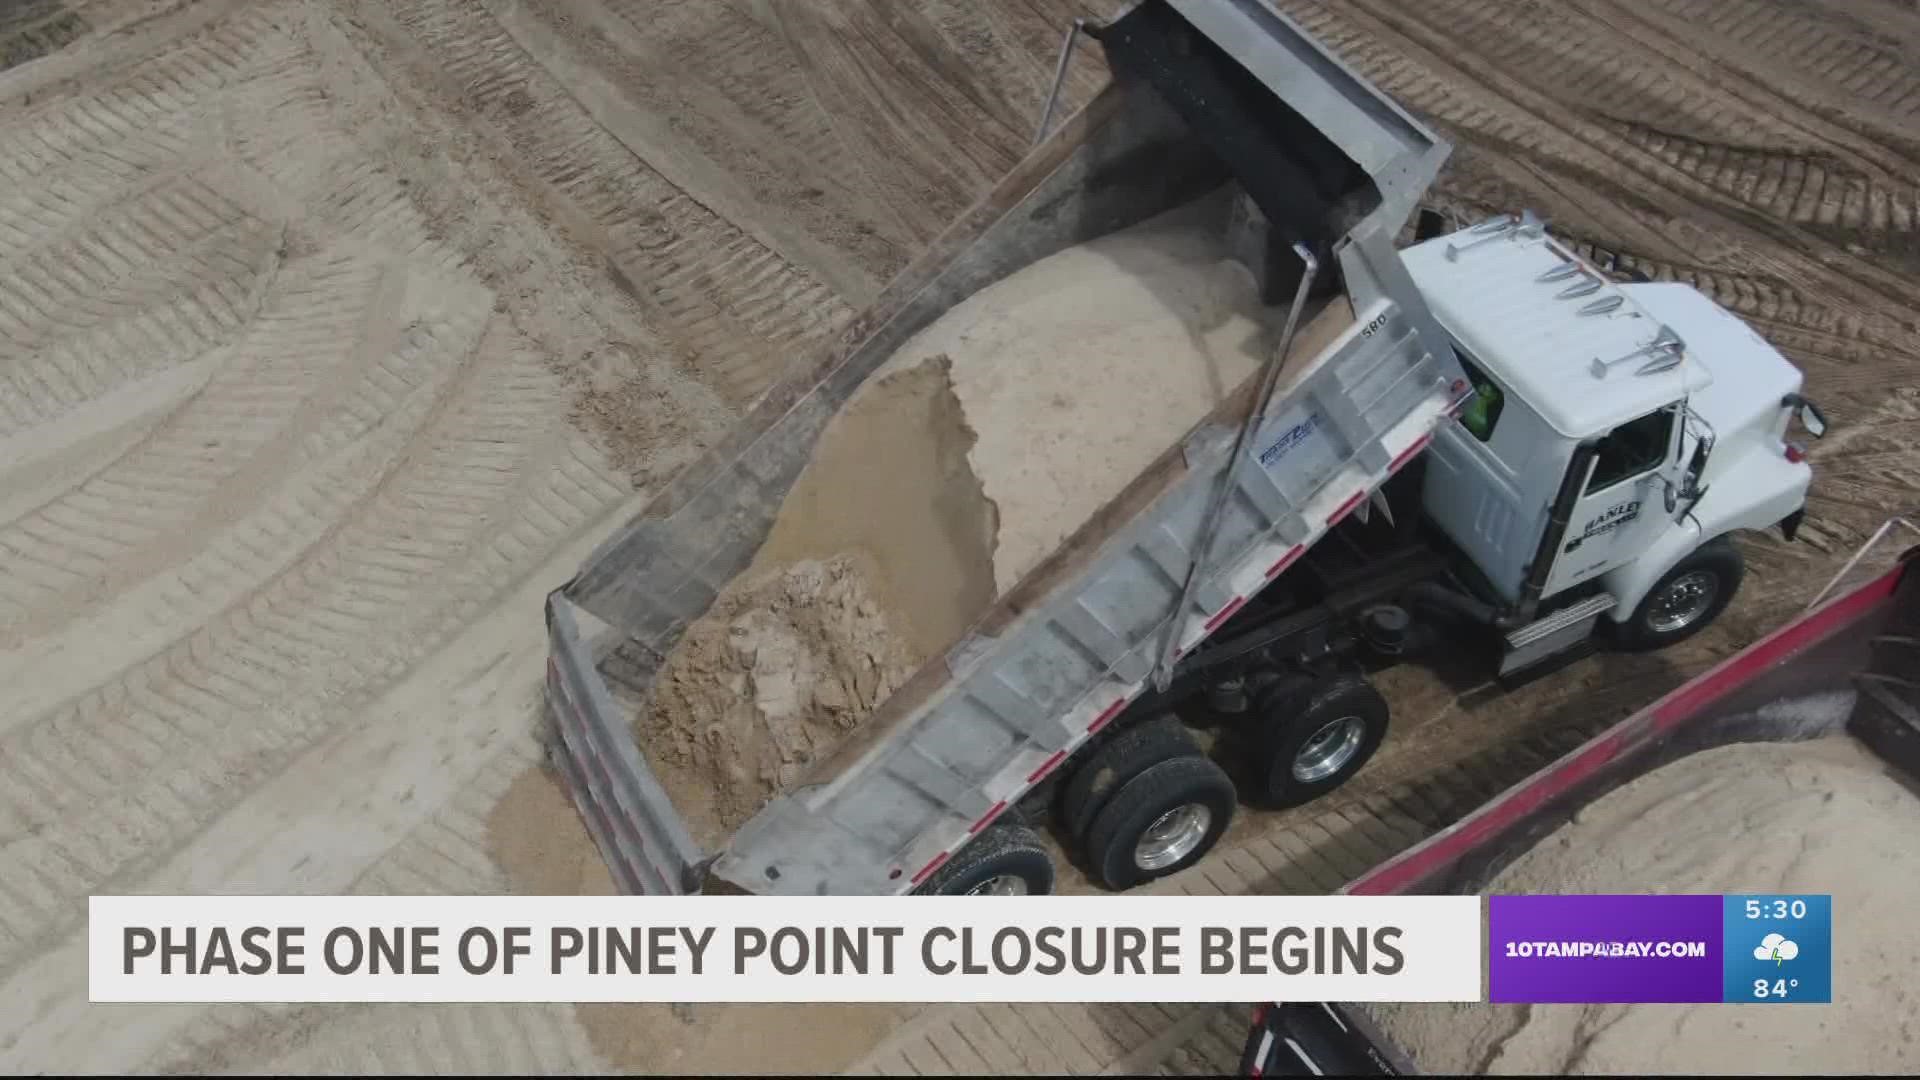 The plan to close down the former Piney Point facility for good started Monday. The plan is expected to take years to complete.